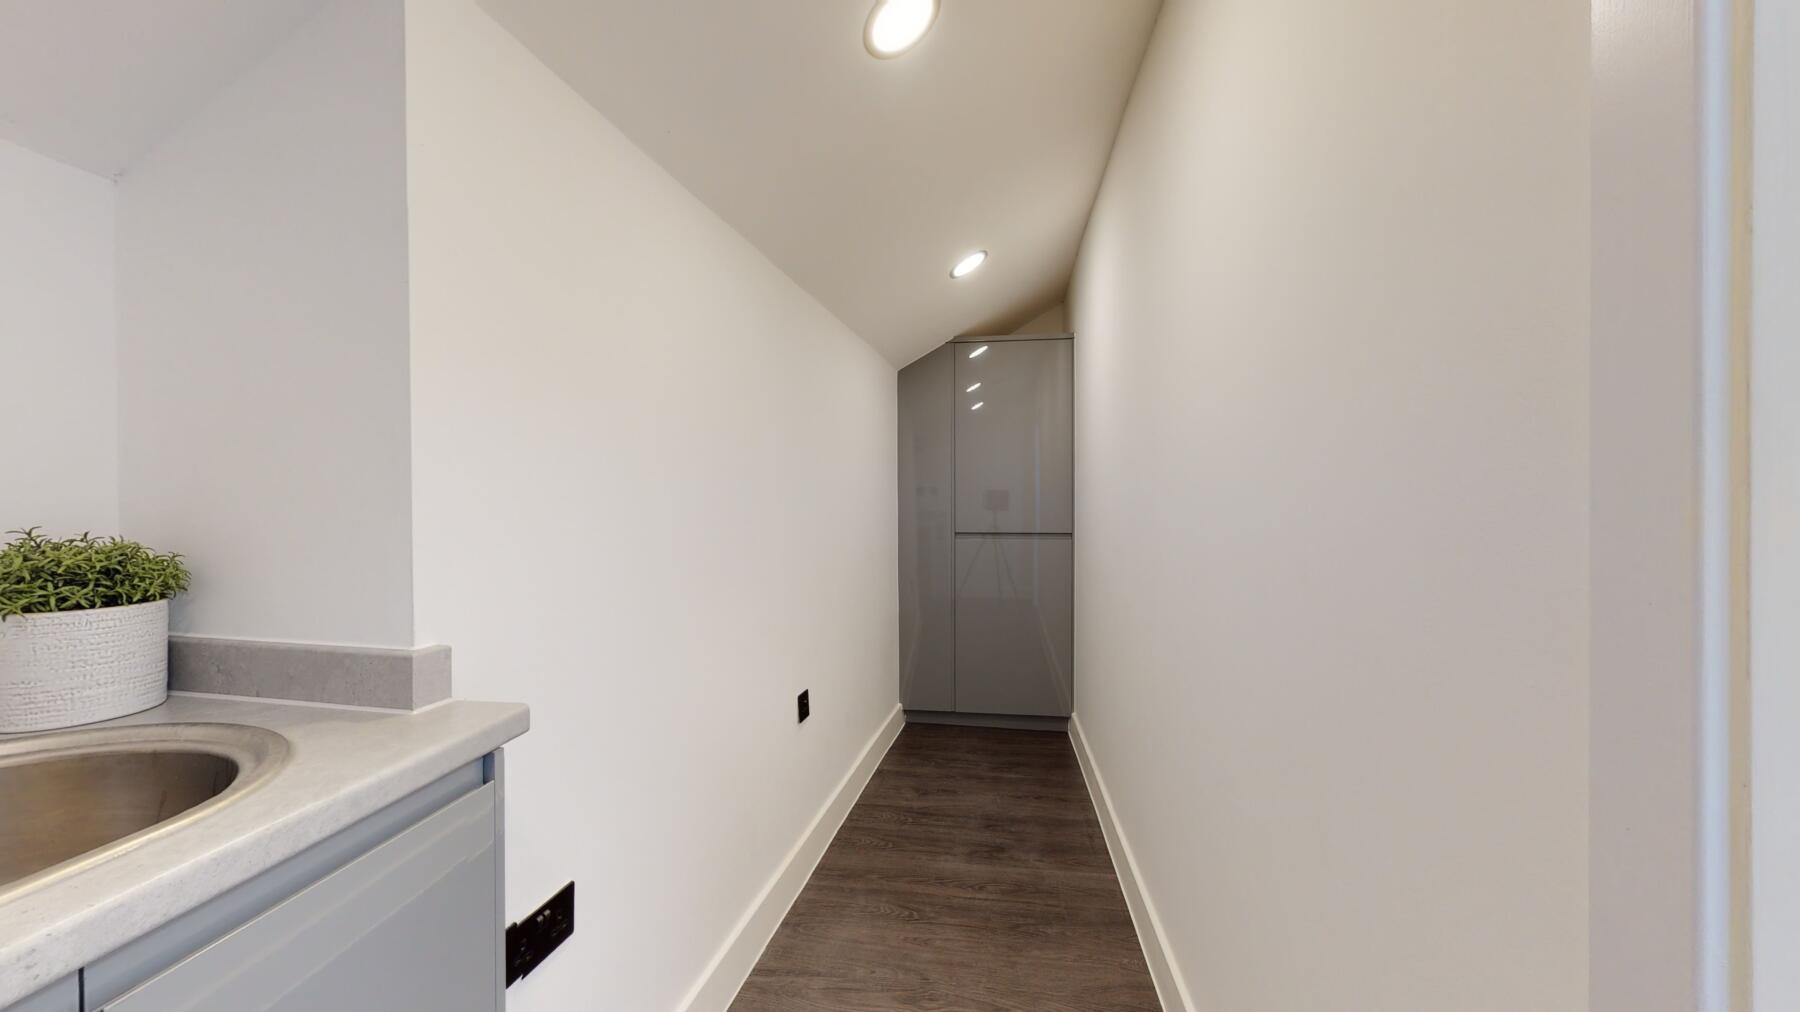 1 bed student accommodation in Nottingham · Available from 26th January 2022